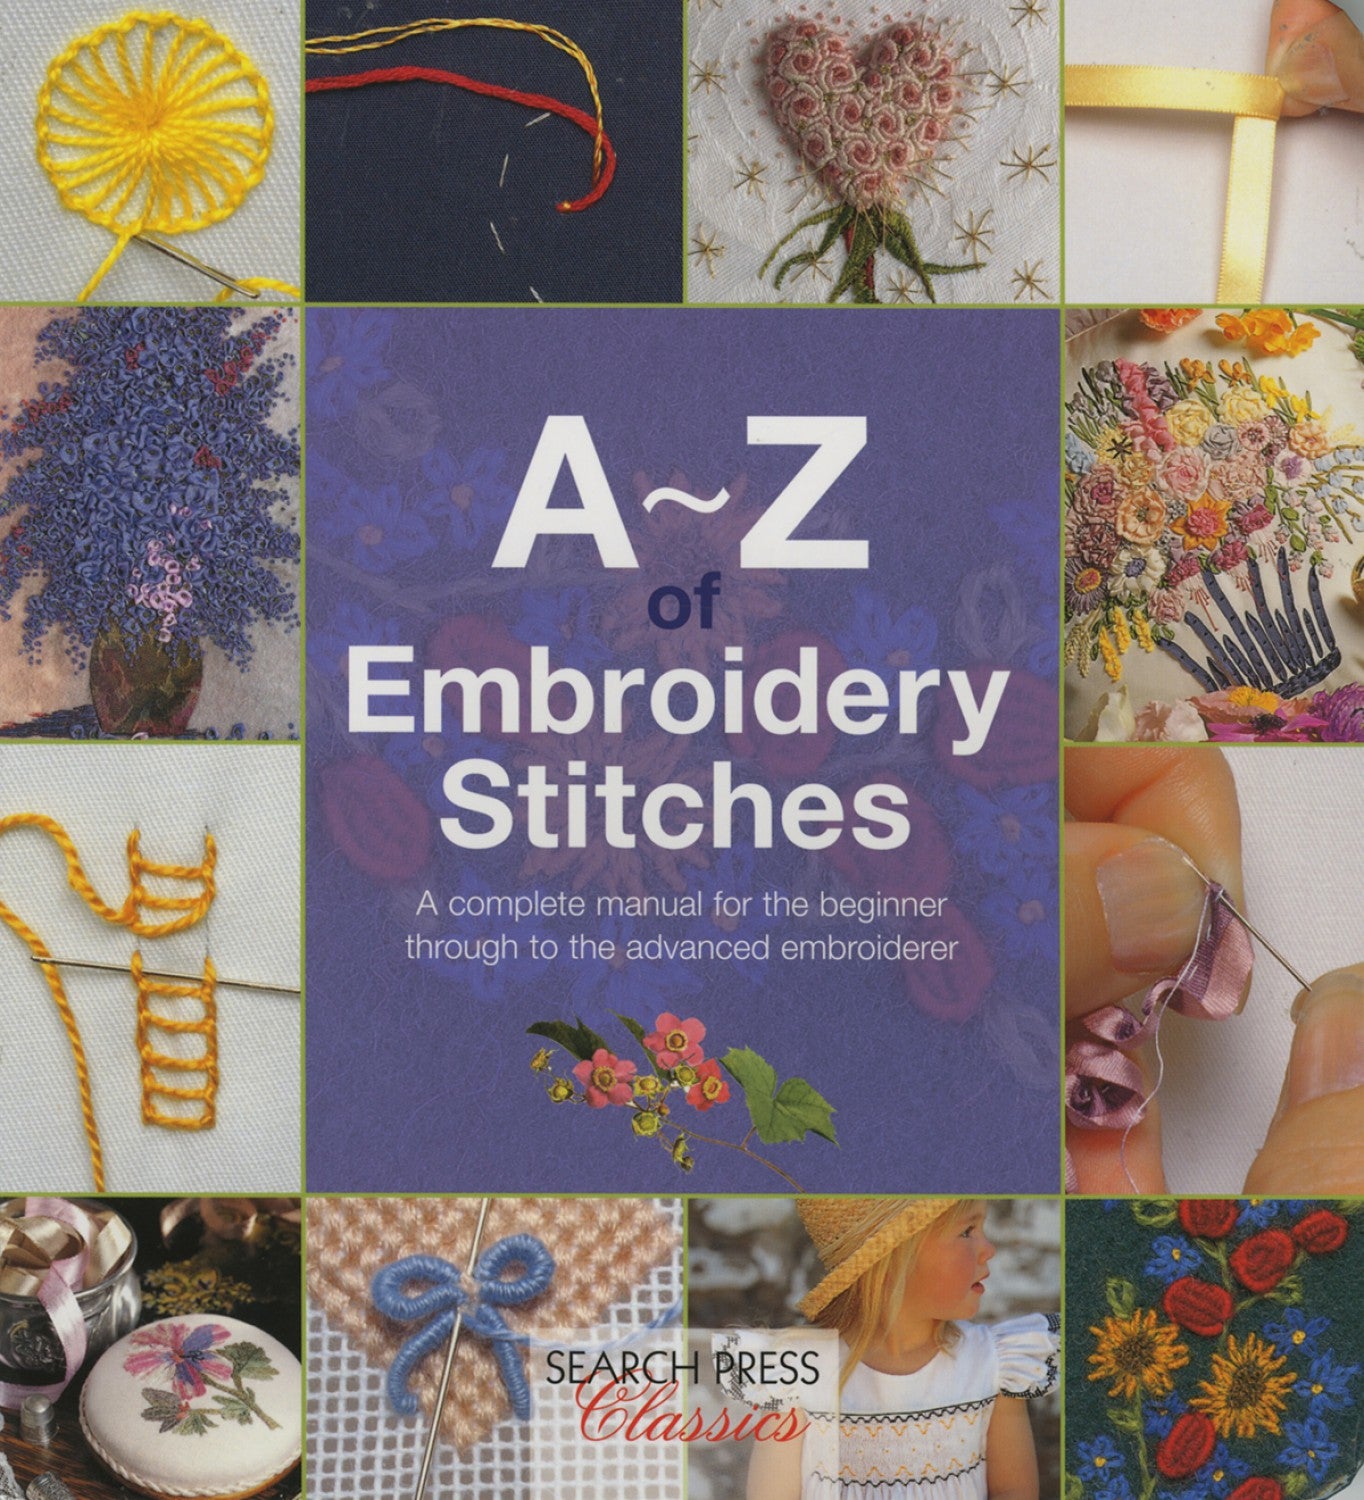 a-z embroidery stitches book volume 1